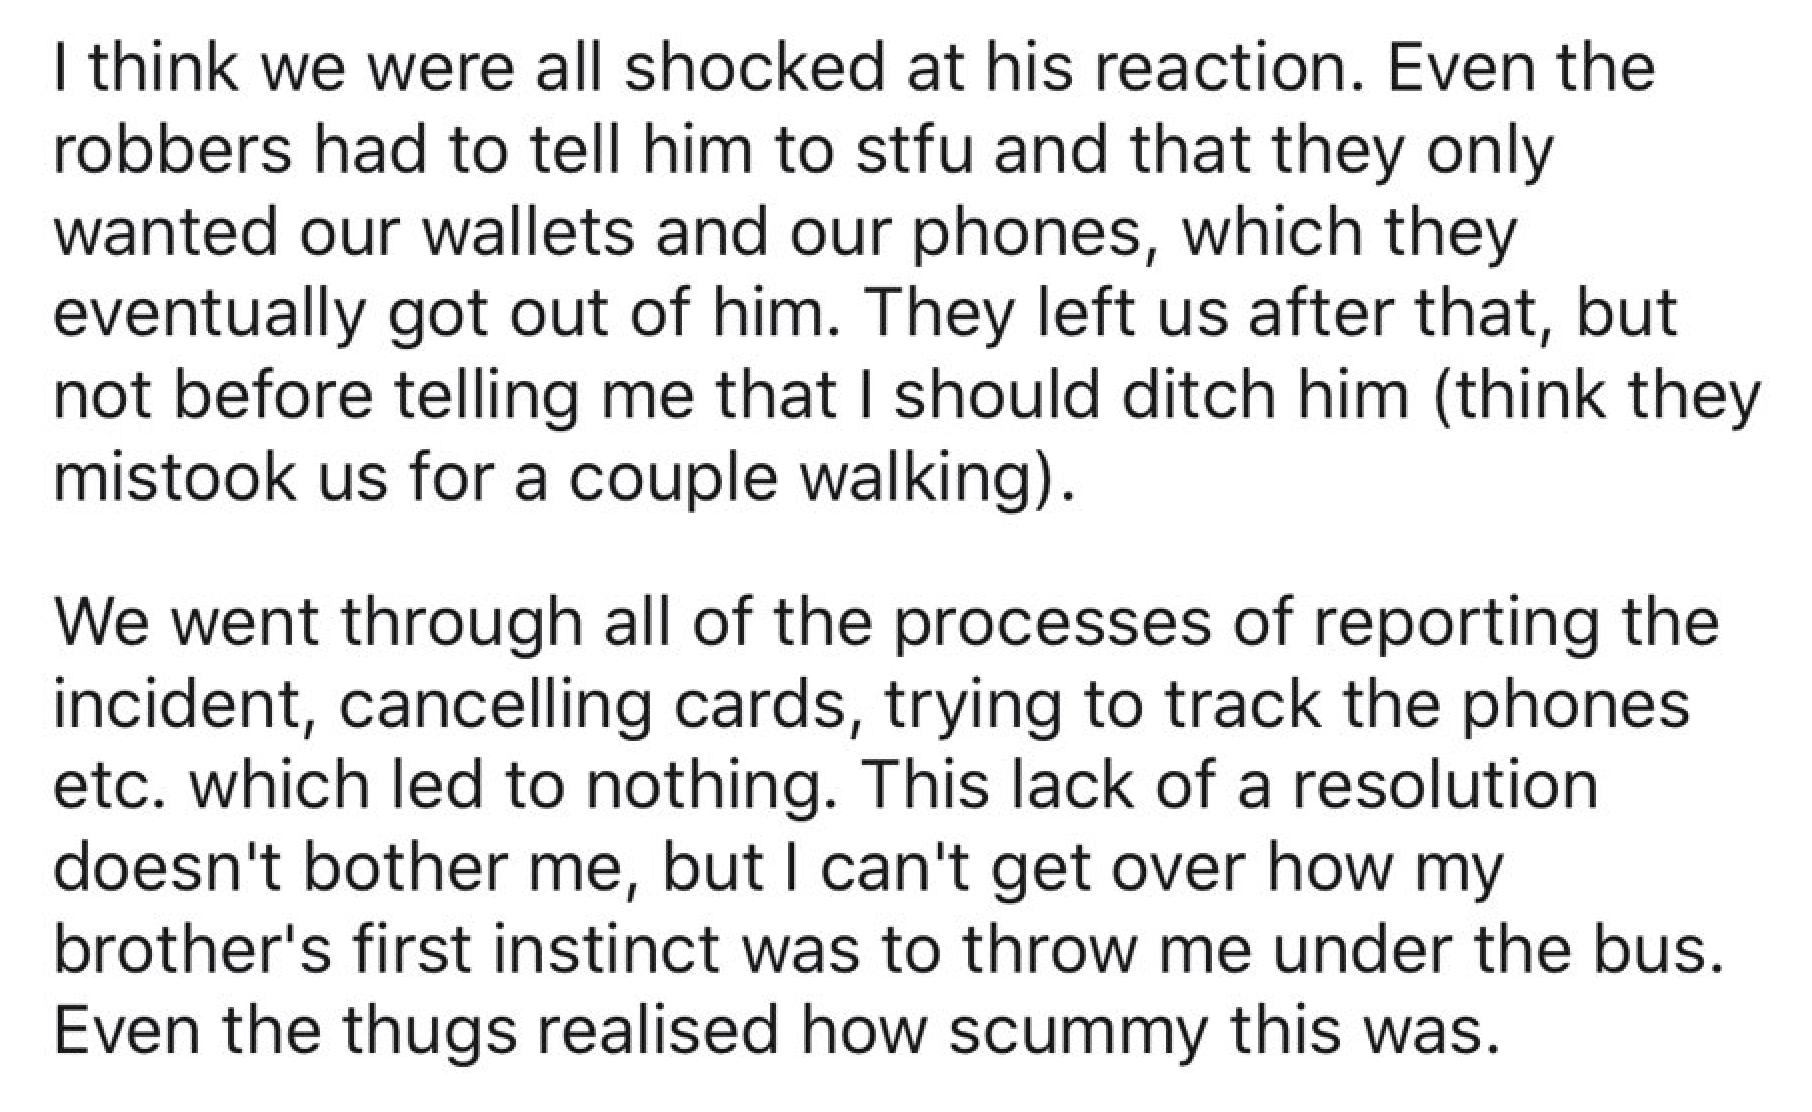 I think we were all shocked at his reaction. Even the robbers had to tell him to stfu and that they only wanted our wallets and our phones, which they eventually got out of him. They left us after that, but not before telling me that I should ditch